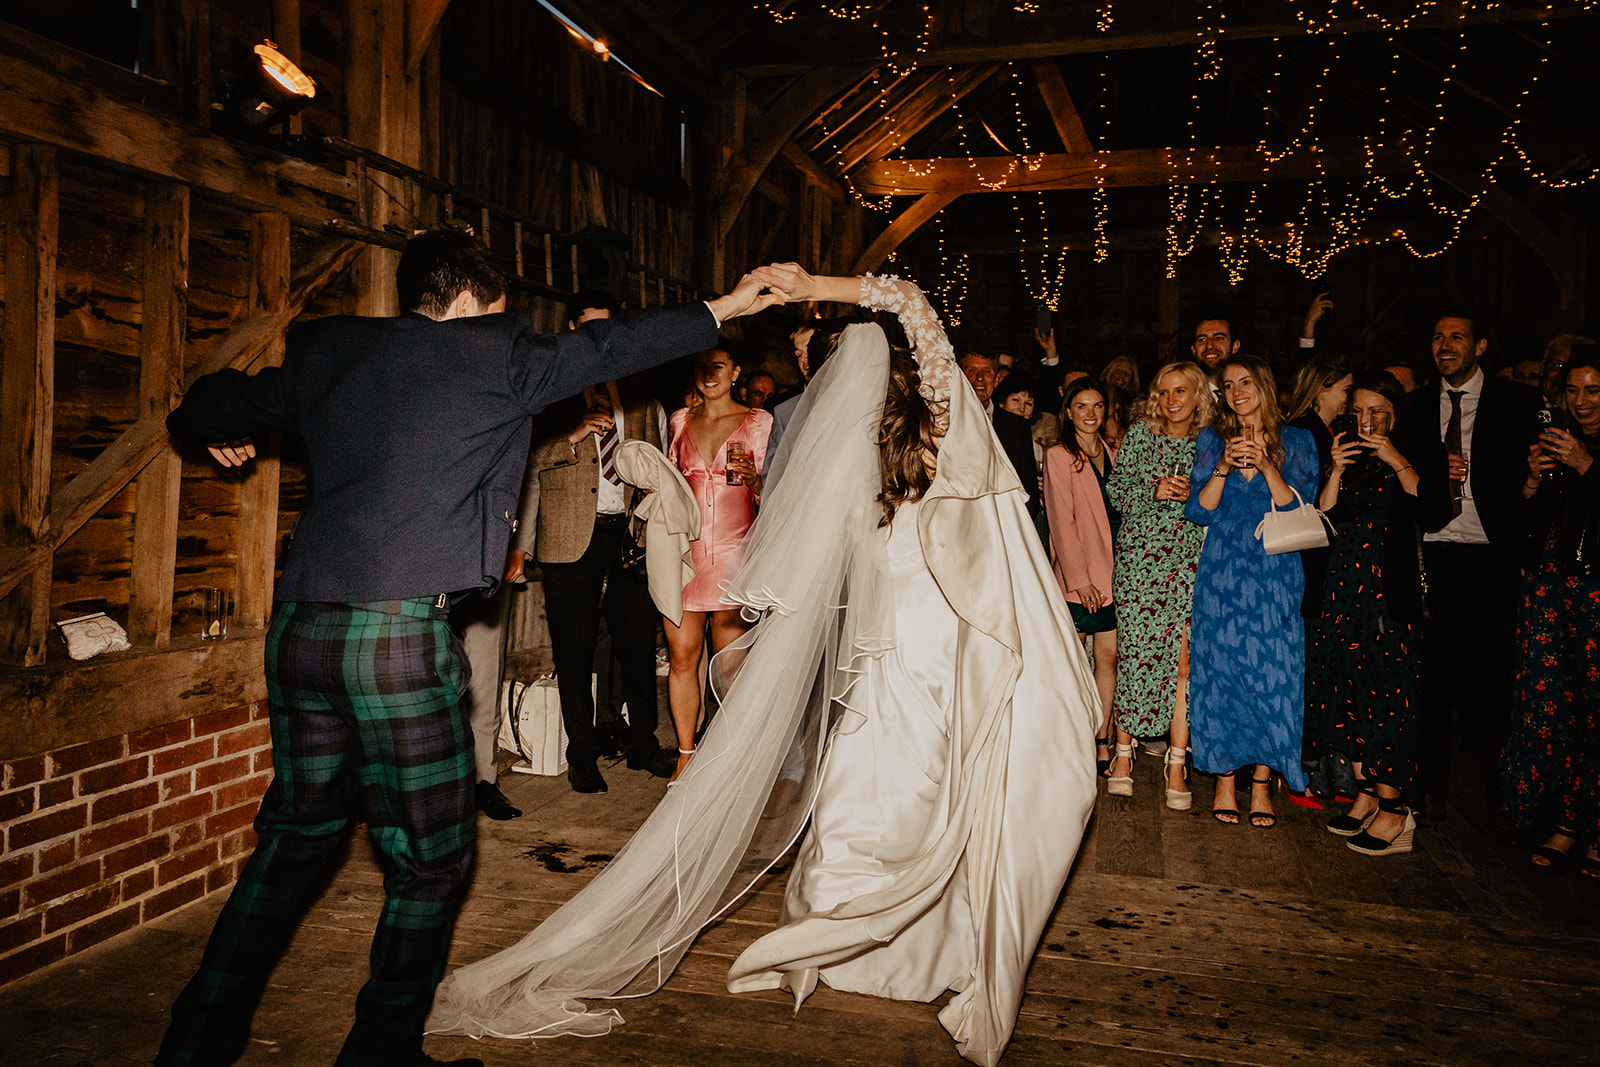 Bride and groom first dance at a Secret Barn Wedding, West Sussex. By Olive Joy Photography